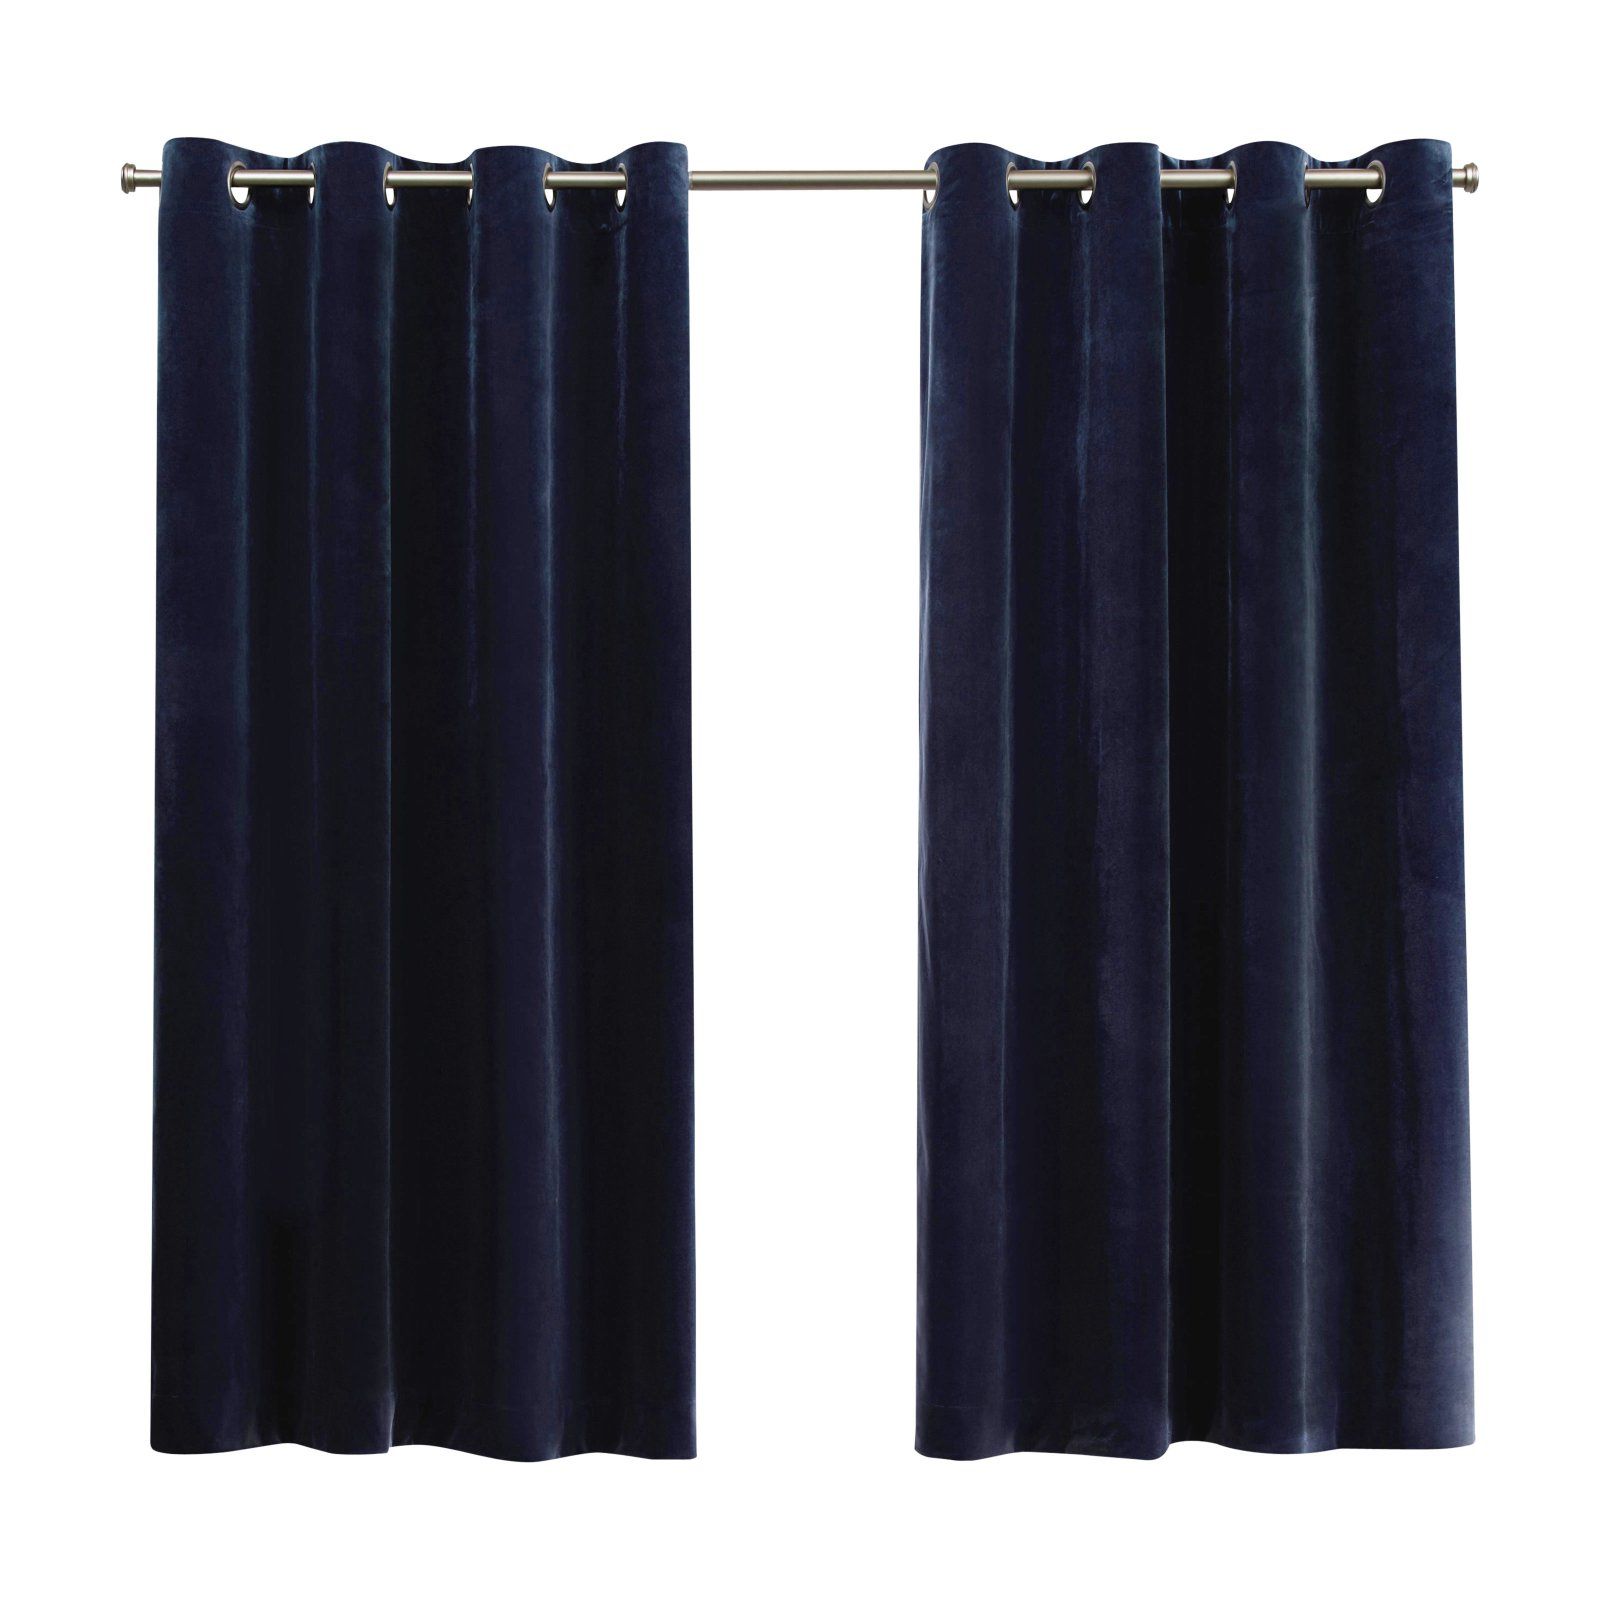 Exclusive Home Curtains 2 Pack Velvet Heavyweight Grommet Top Curtain Panels Pertaining To Newest Velvet Heavyweight Grommet Top Curtain Panel Pairs (View 12 of 20)